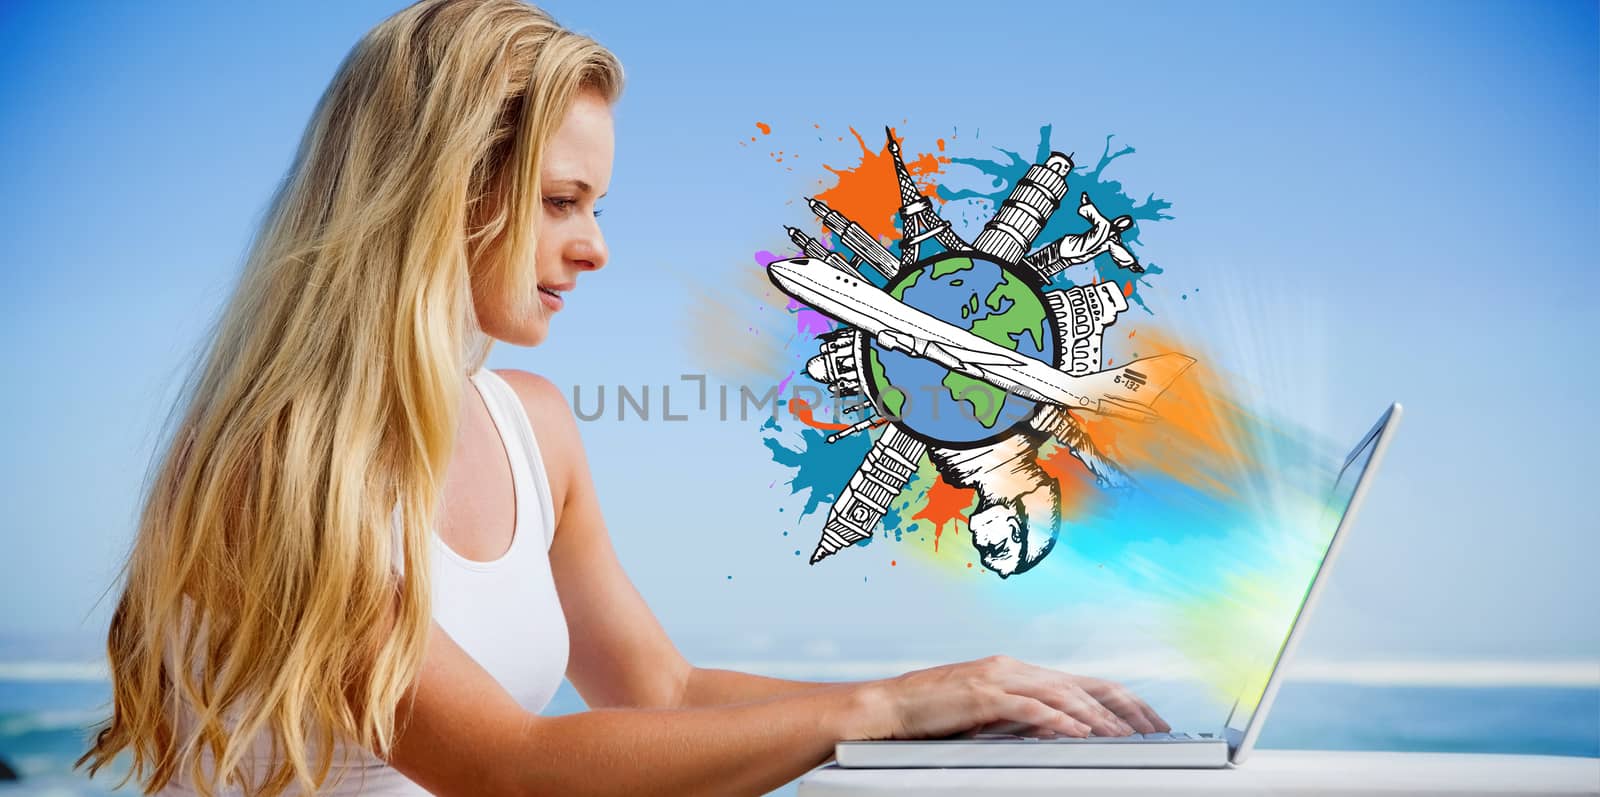 Pretty blonde using her laptop at the beach against global tourism concept on paint splashes